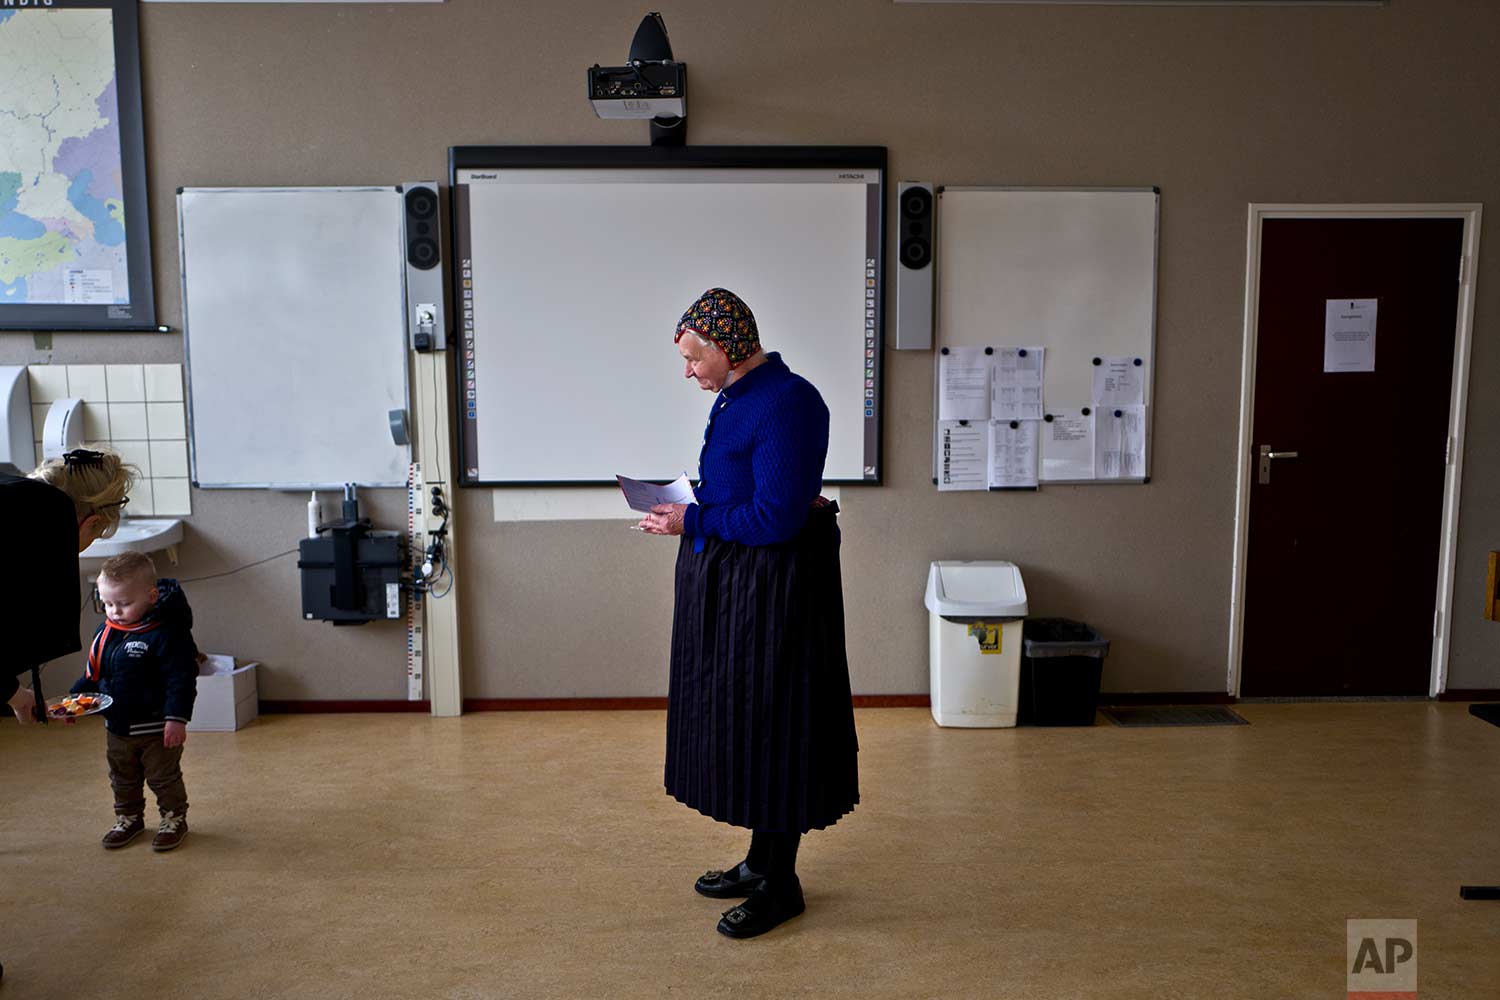  In this Wednesday, March 15, 2017 photo, an elderly woman wearing a traditional hat waits her turn to cast her vote for the Dutch general elections at a polling station in a school in Staphorst, Netherlands. Mark Rutte, the Dutch prime minister who 